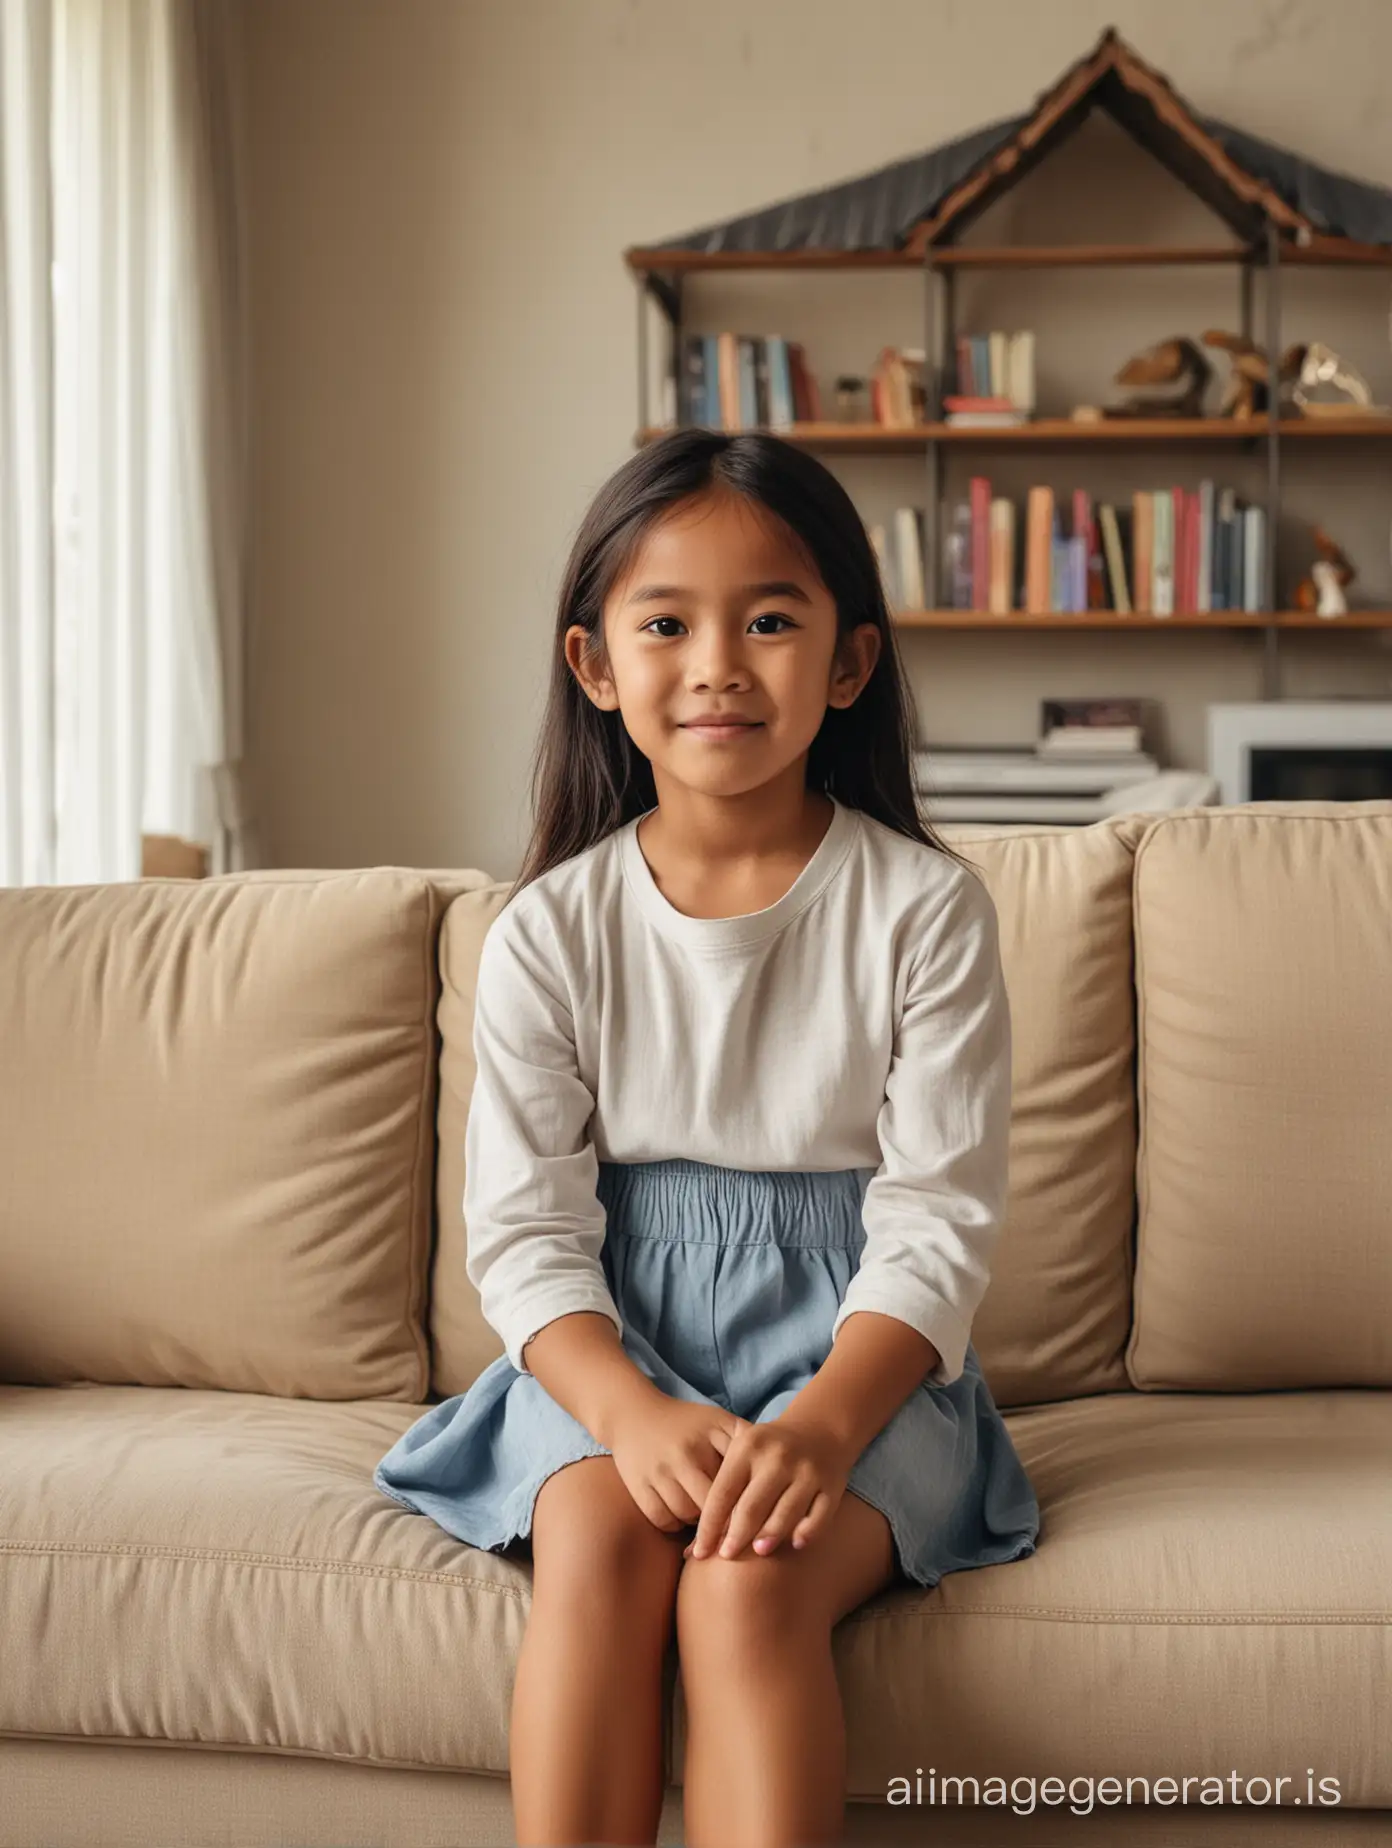 A six-year-old Indonesian girl in casual clothing sits on a sofa with a classic house background